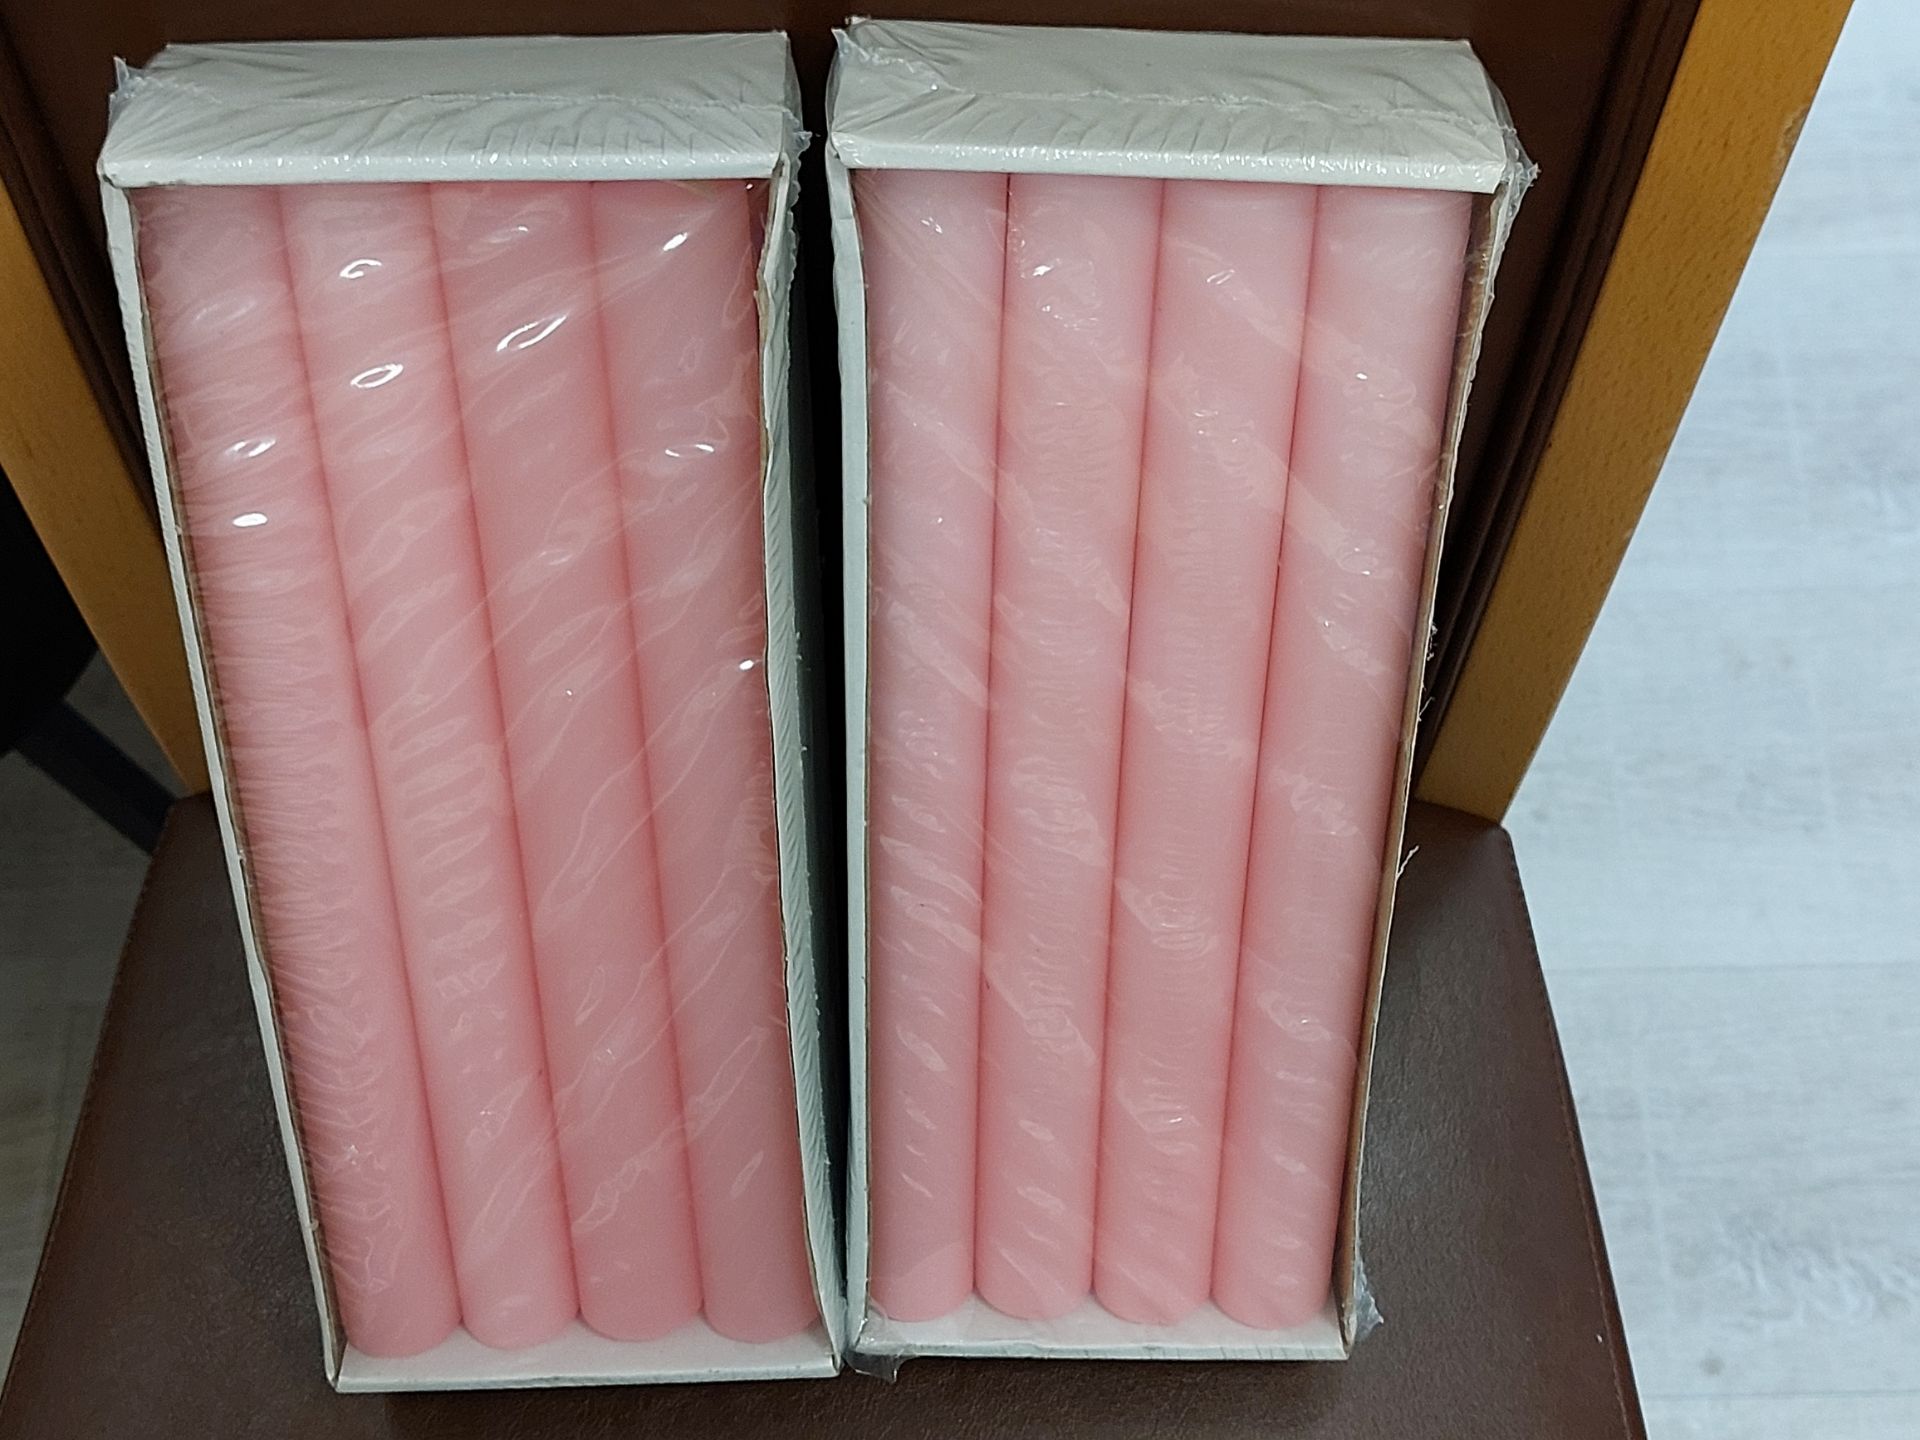 Large pink candles 300 mm x 30 mm. 2 boxes of 8 - Image 2 of 7